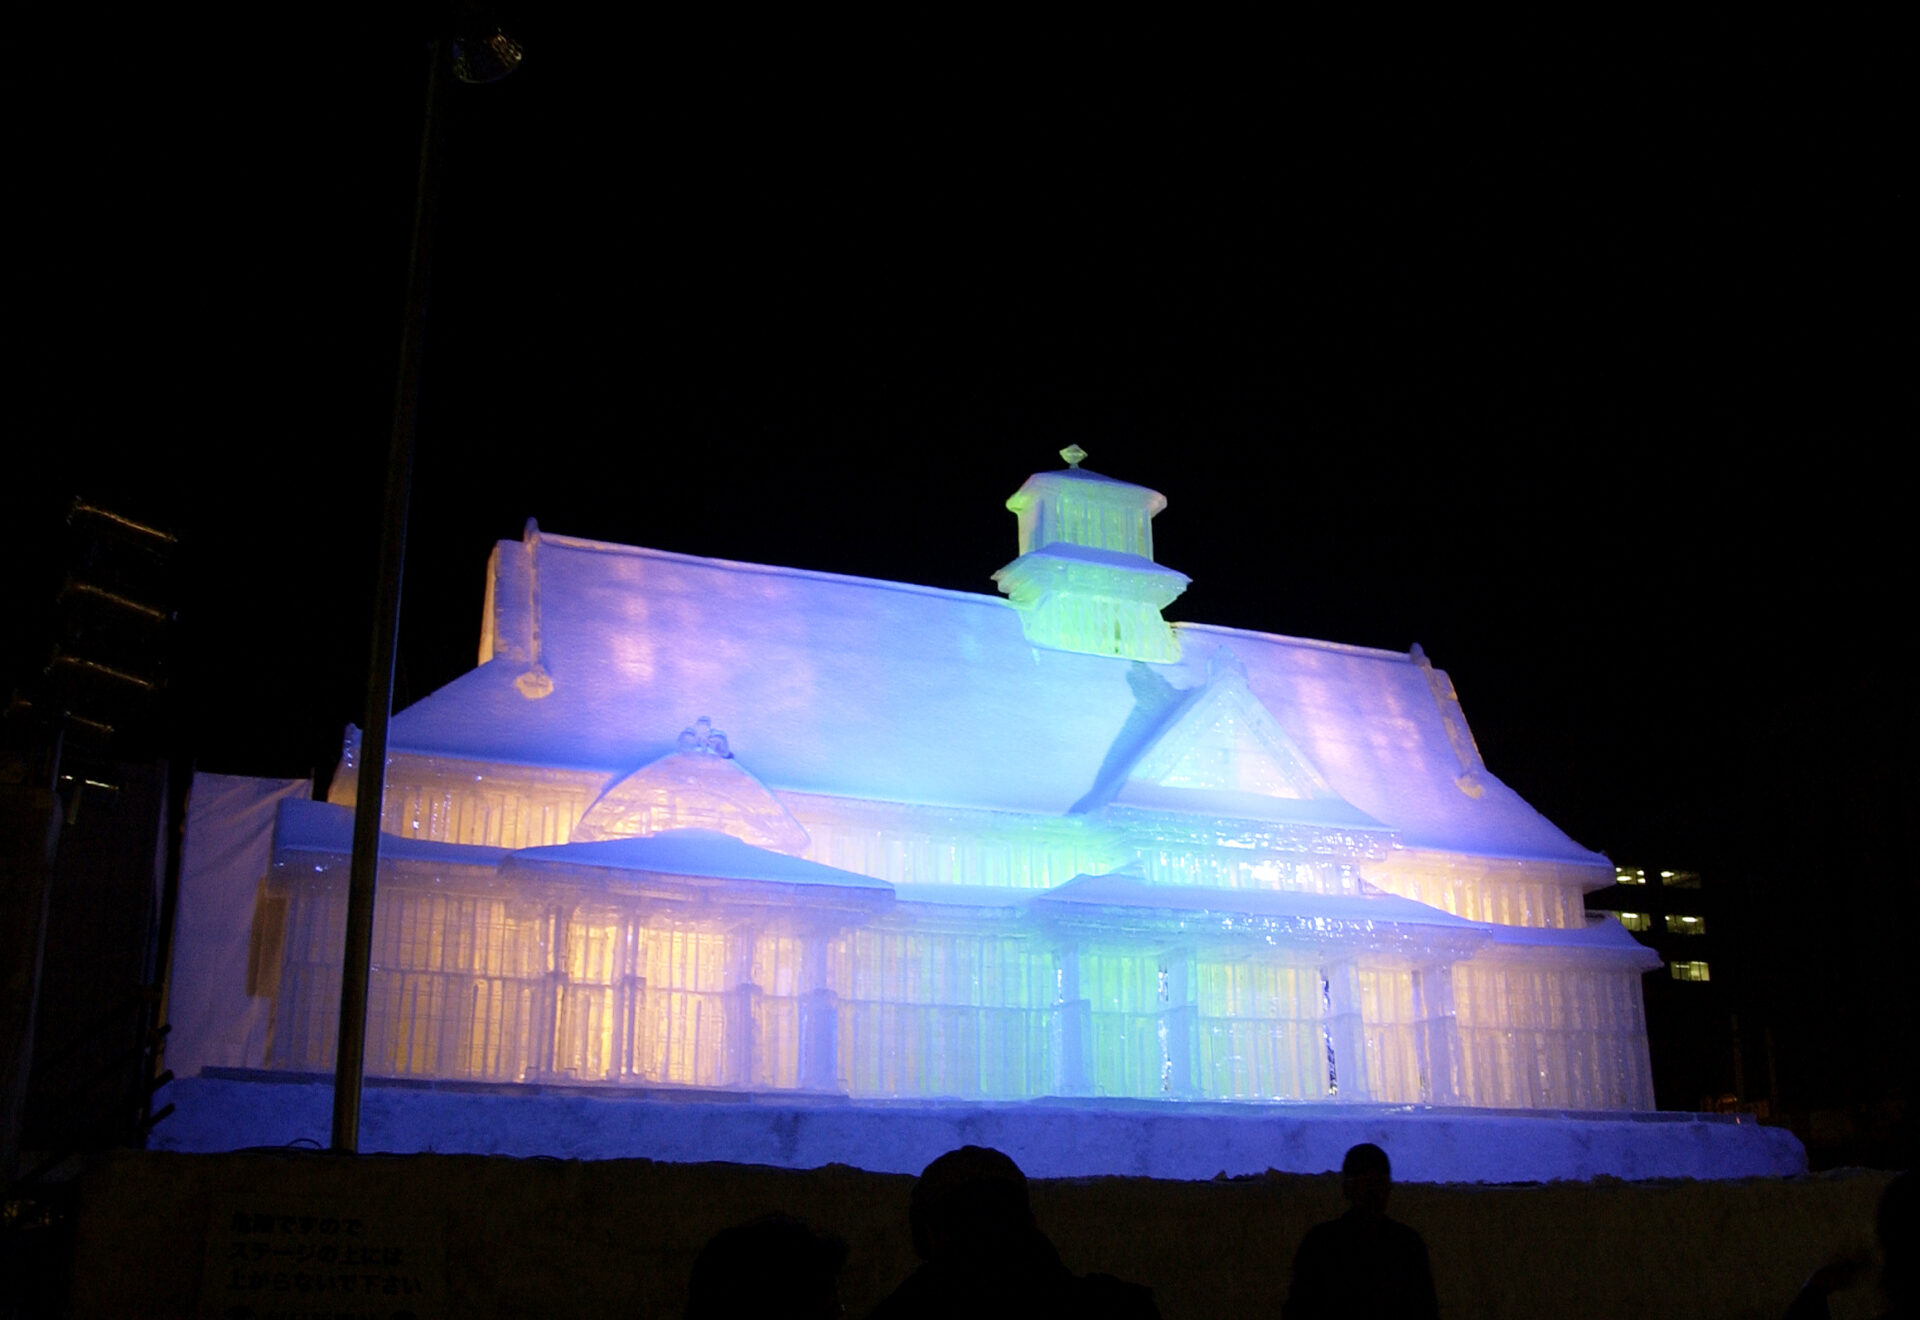 A snow statue of a building colorfully lit up at night